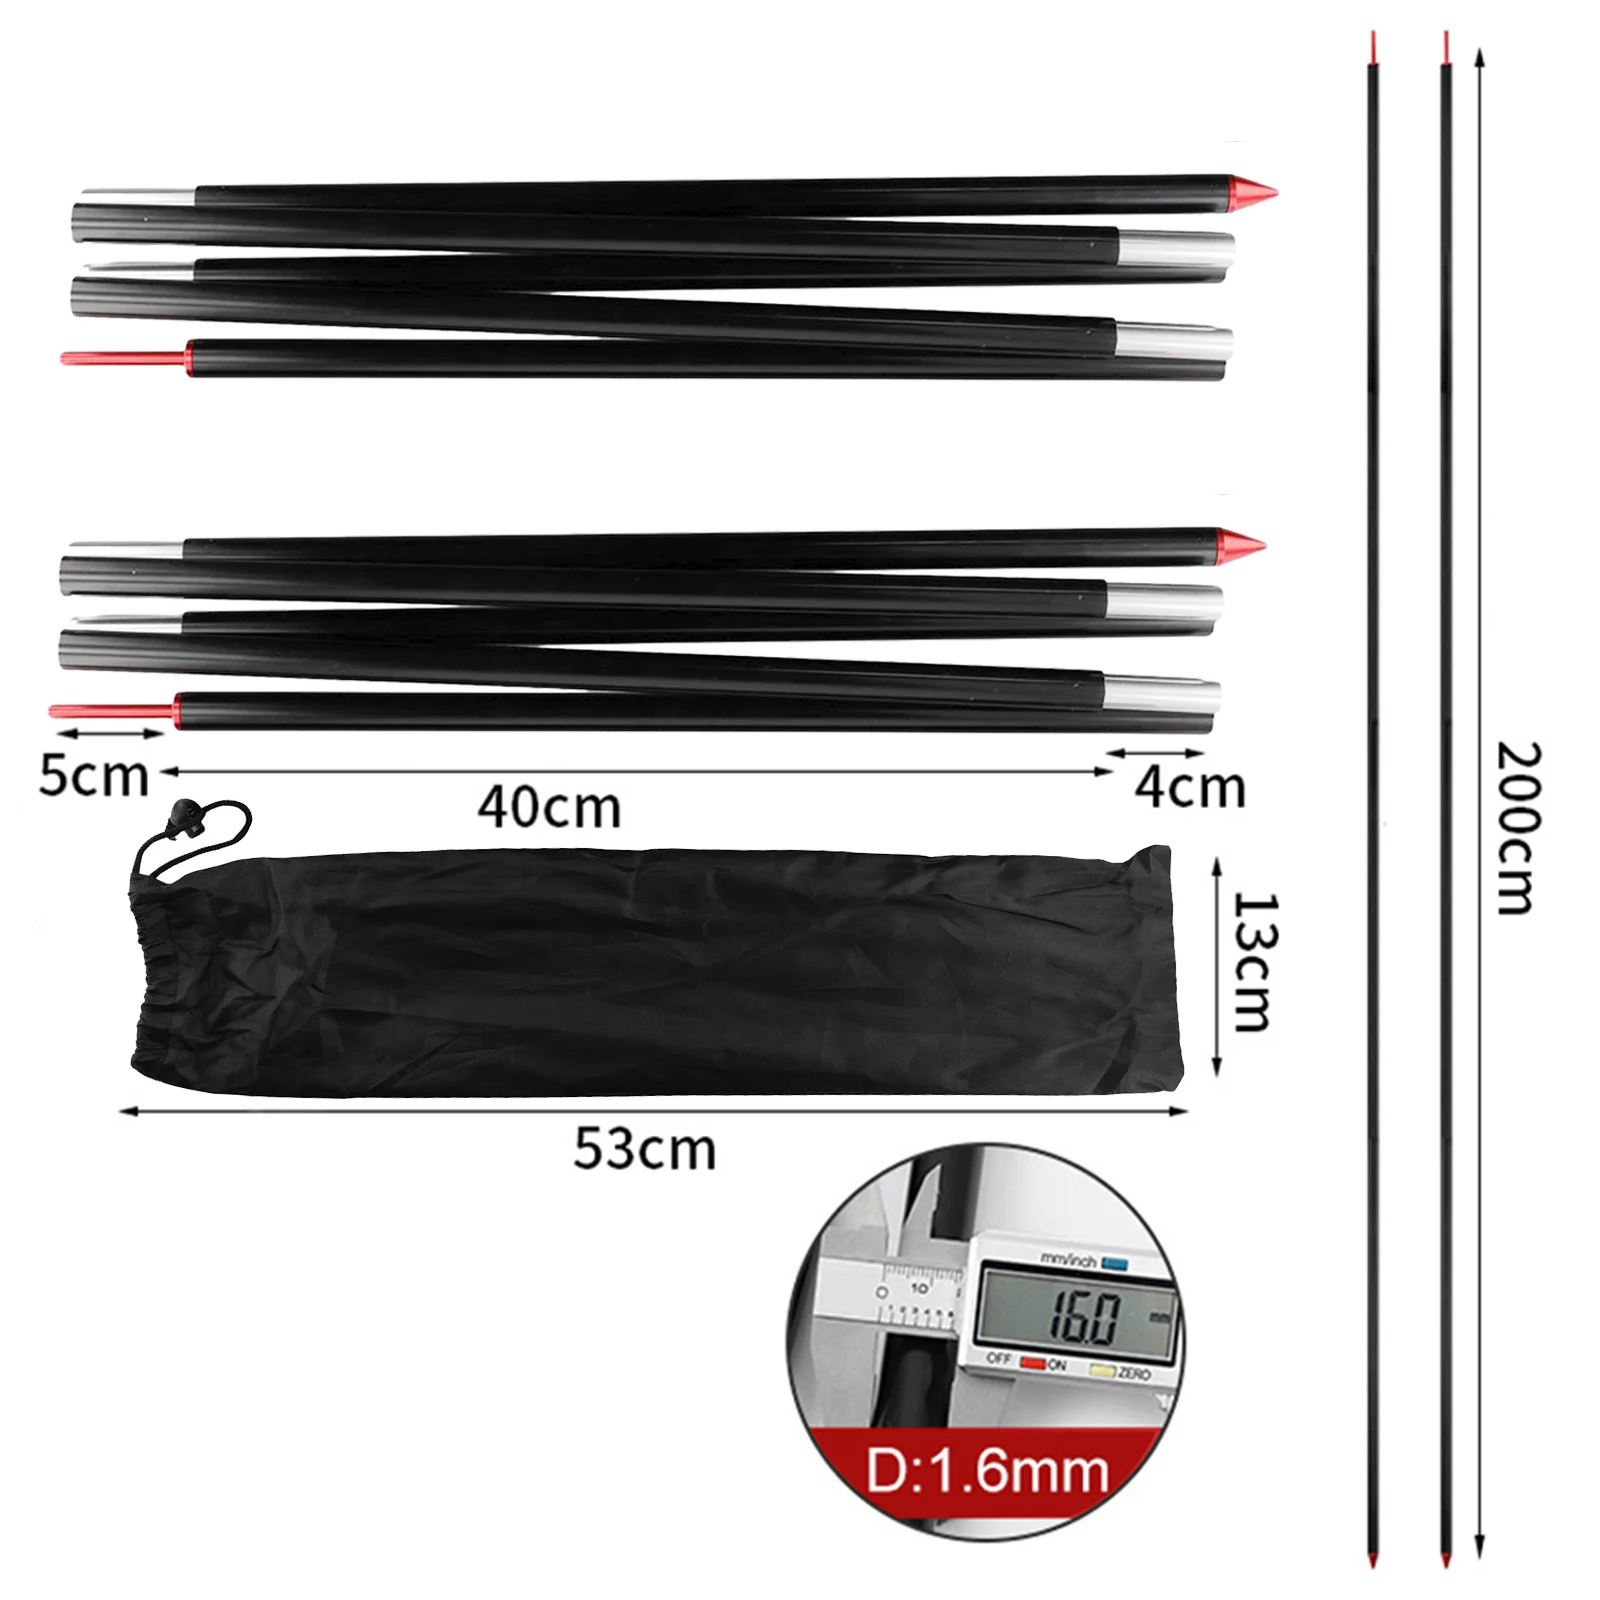 

Tent Rod Tent Poles Tarp Poles Practical Versatile 1 * Storage Bag 1 Pair Awning Supporting Rod High-Quality 1 * Pair Of Rod New